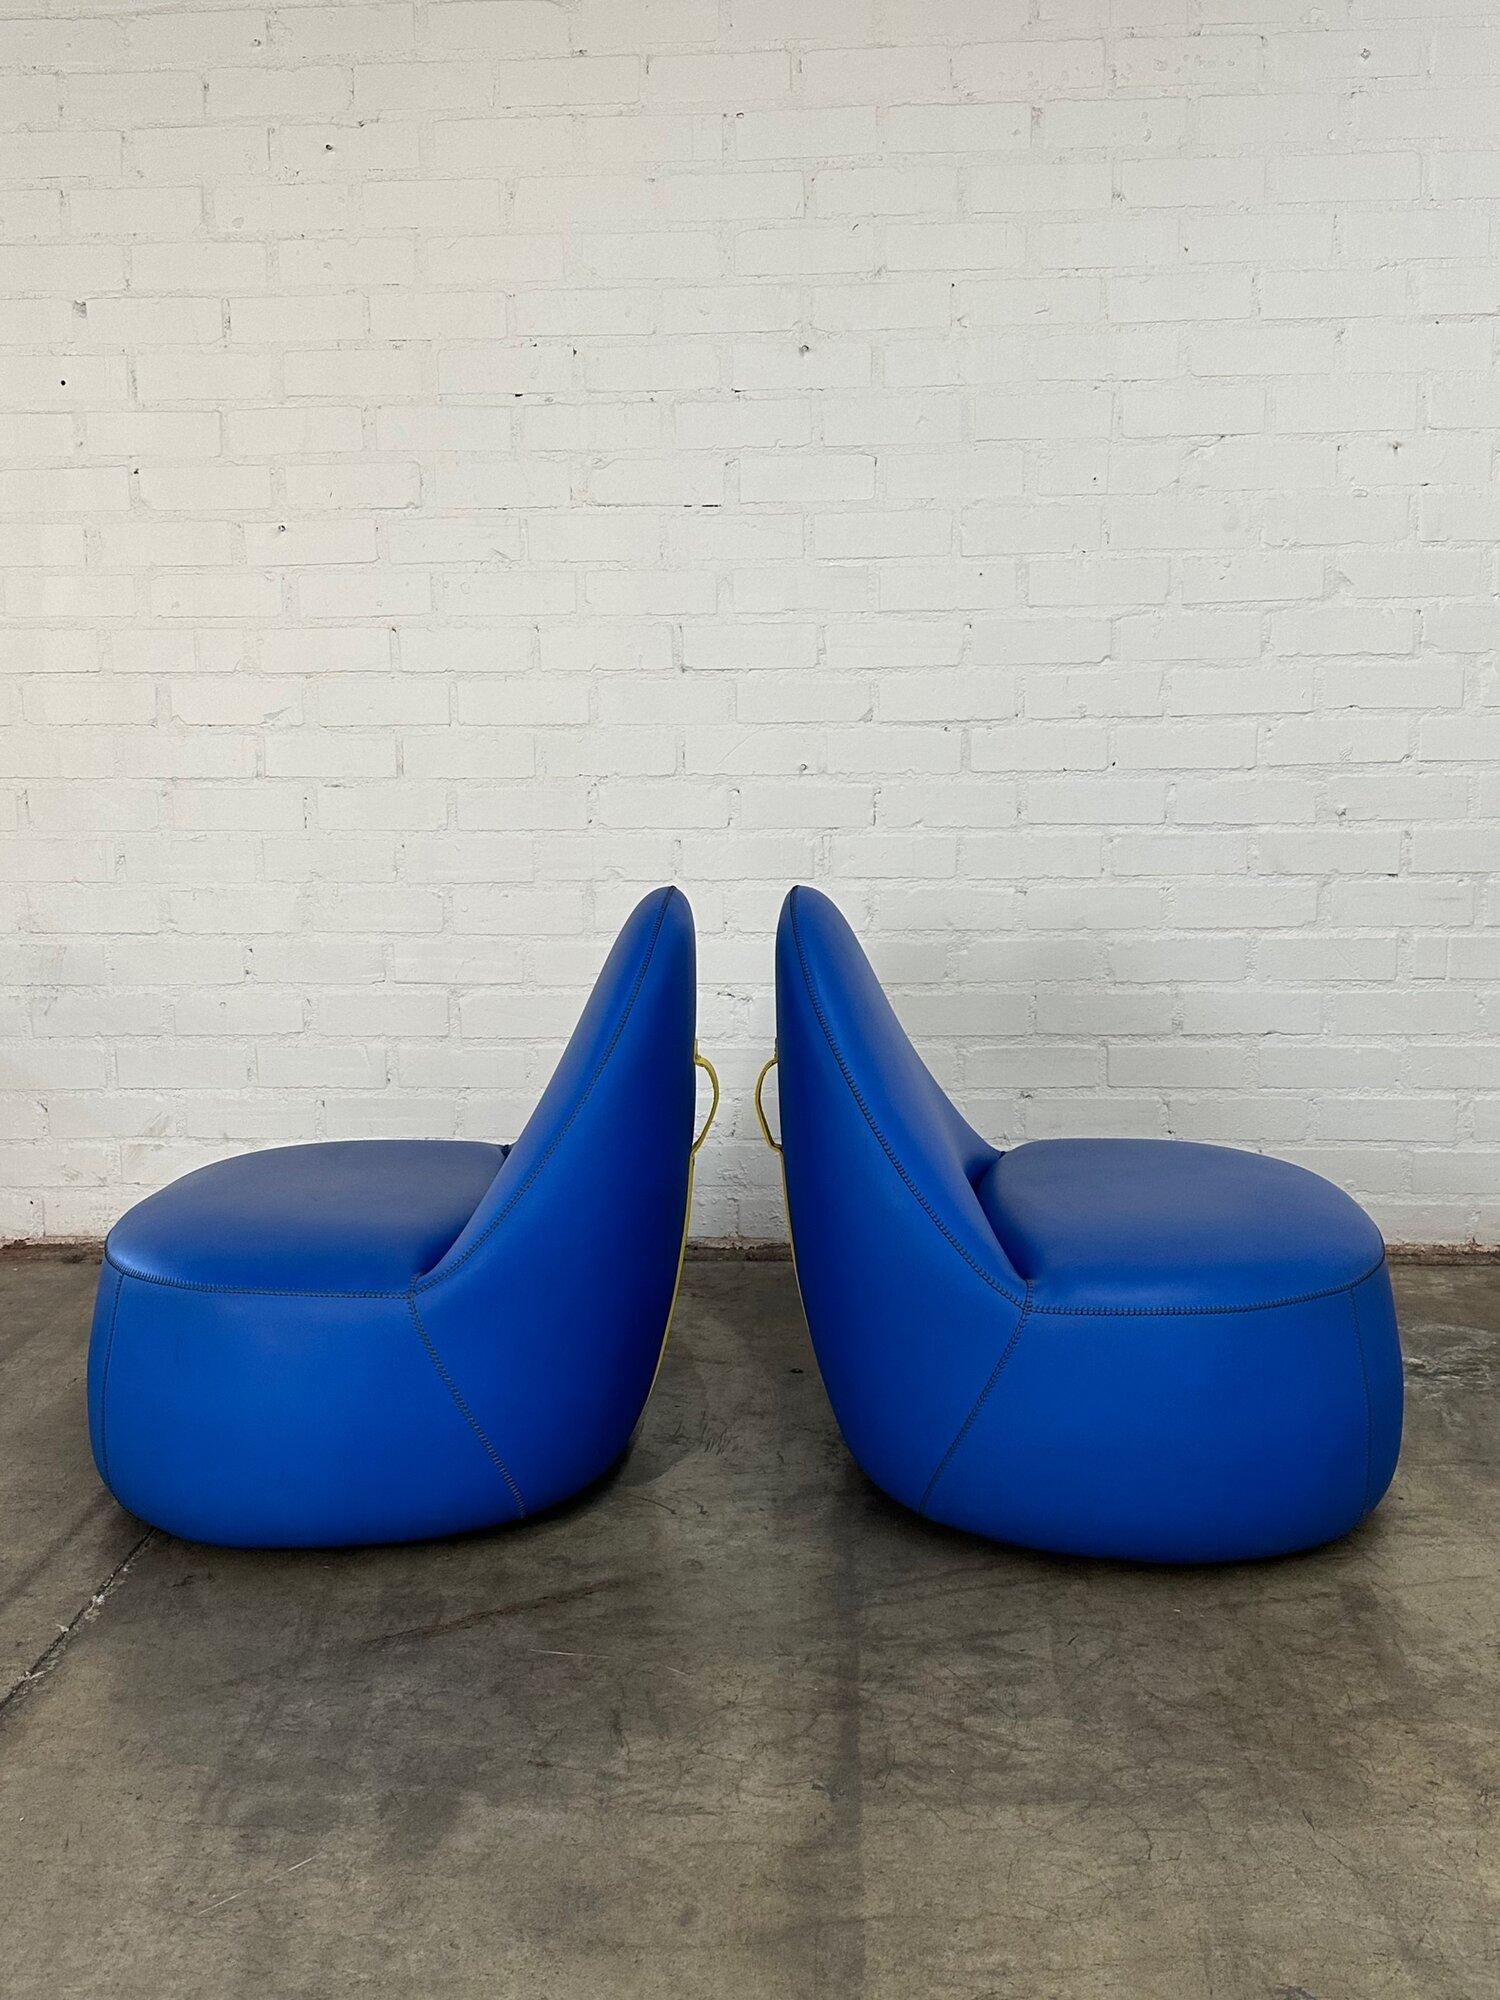 Mitt Lounge Chairs in Blue with Yellow Accents by Claudia + Harry Washington, Be For Sale 2